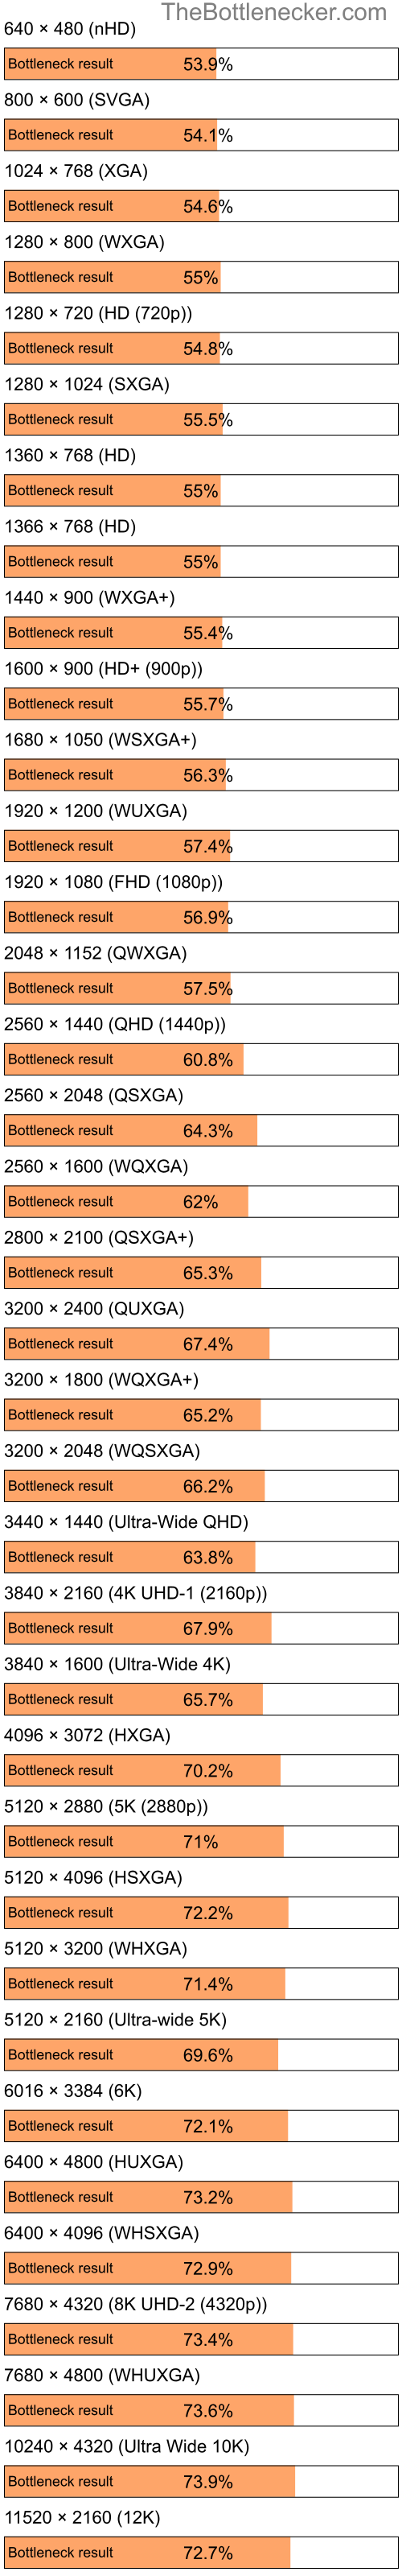 Bottleneck results by resolution for Intel Pentium 4 and AMD Radeon HD 6290 in Processor Intense Tasks